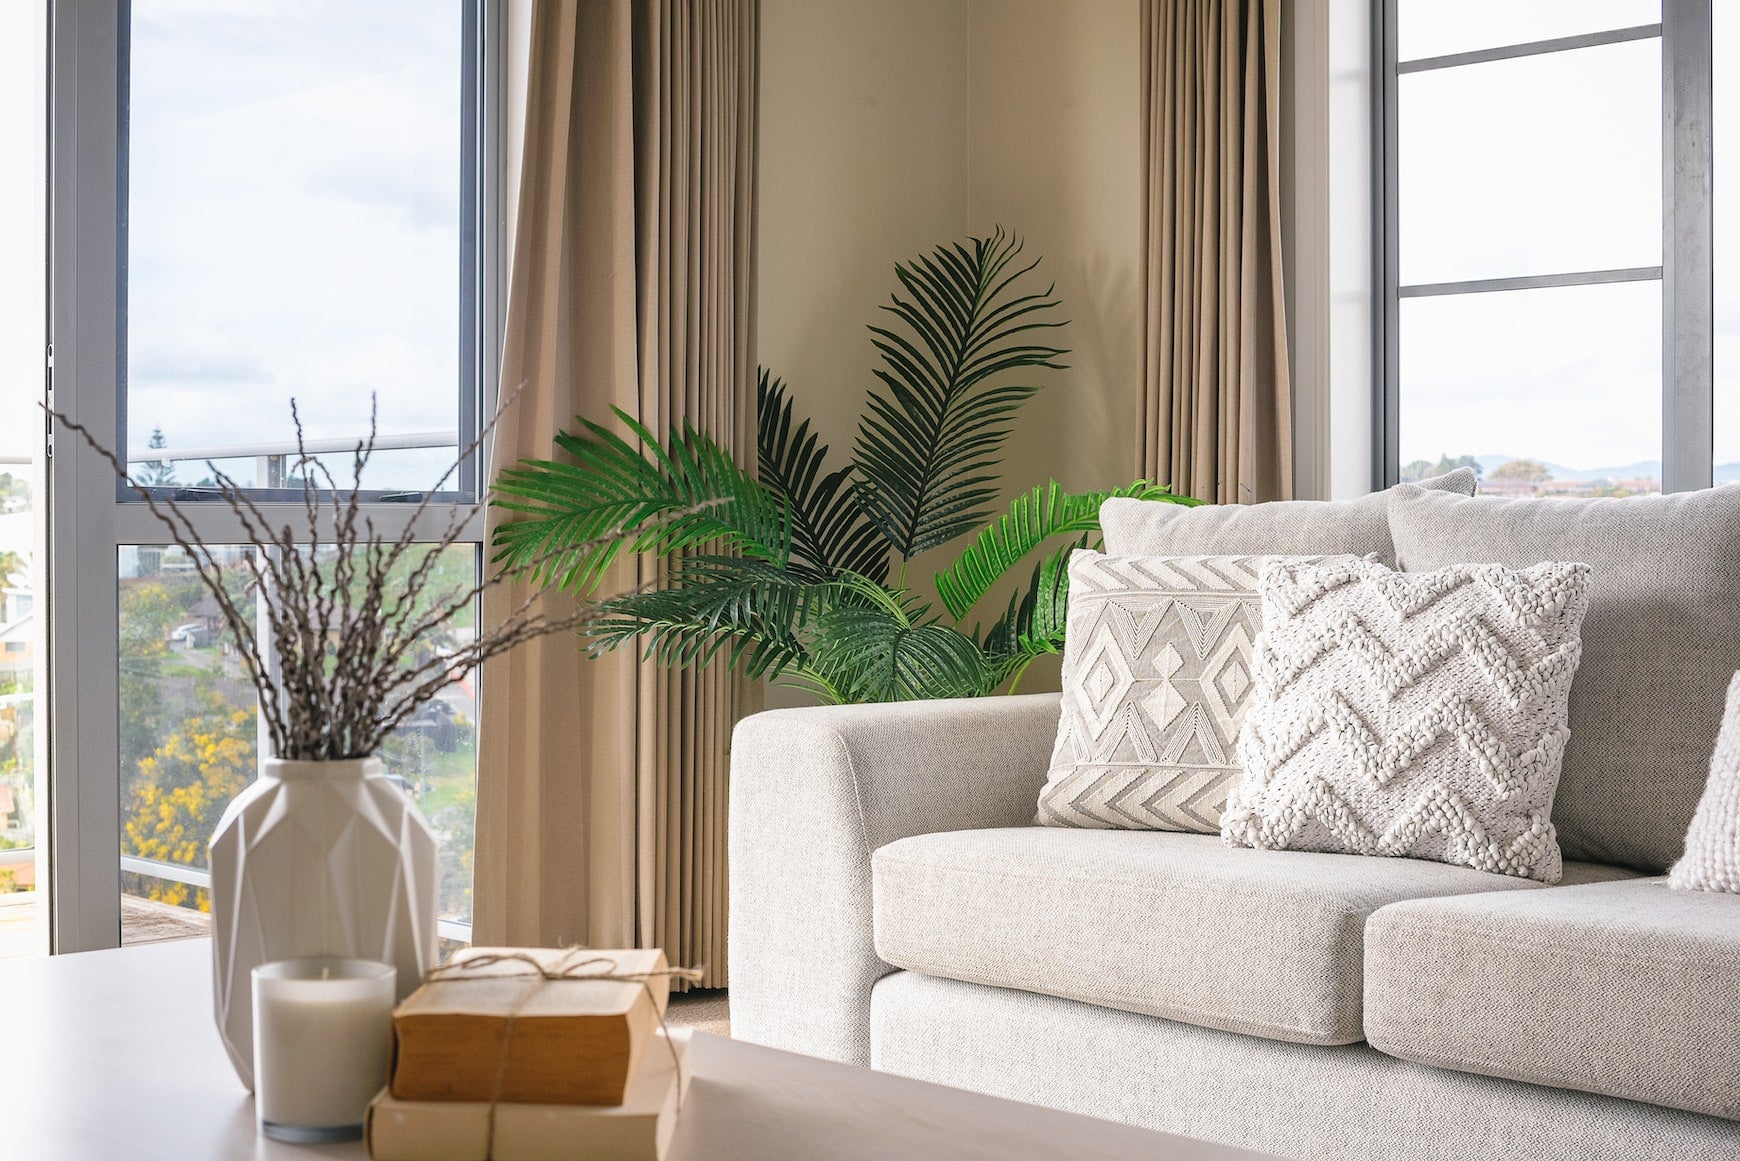 white decorative pillows on a couch next to a plant